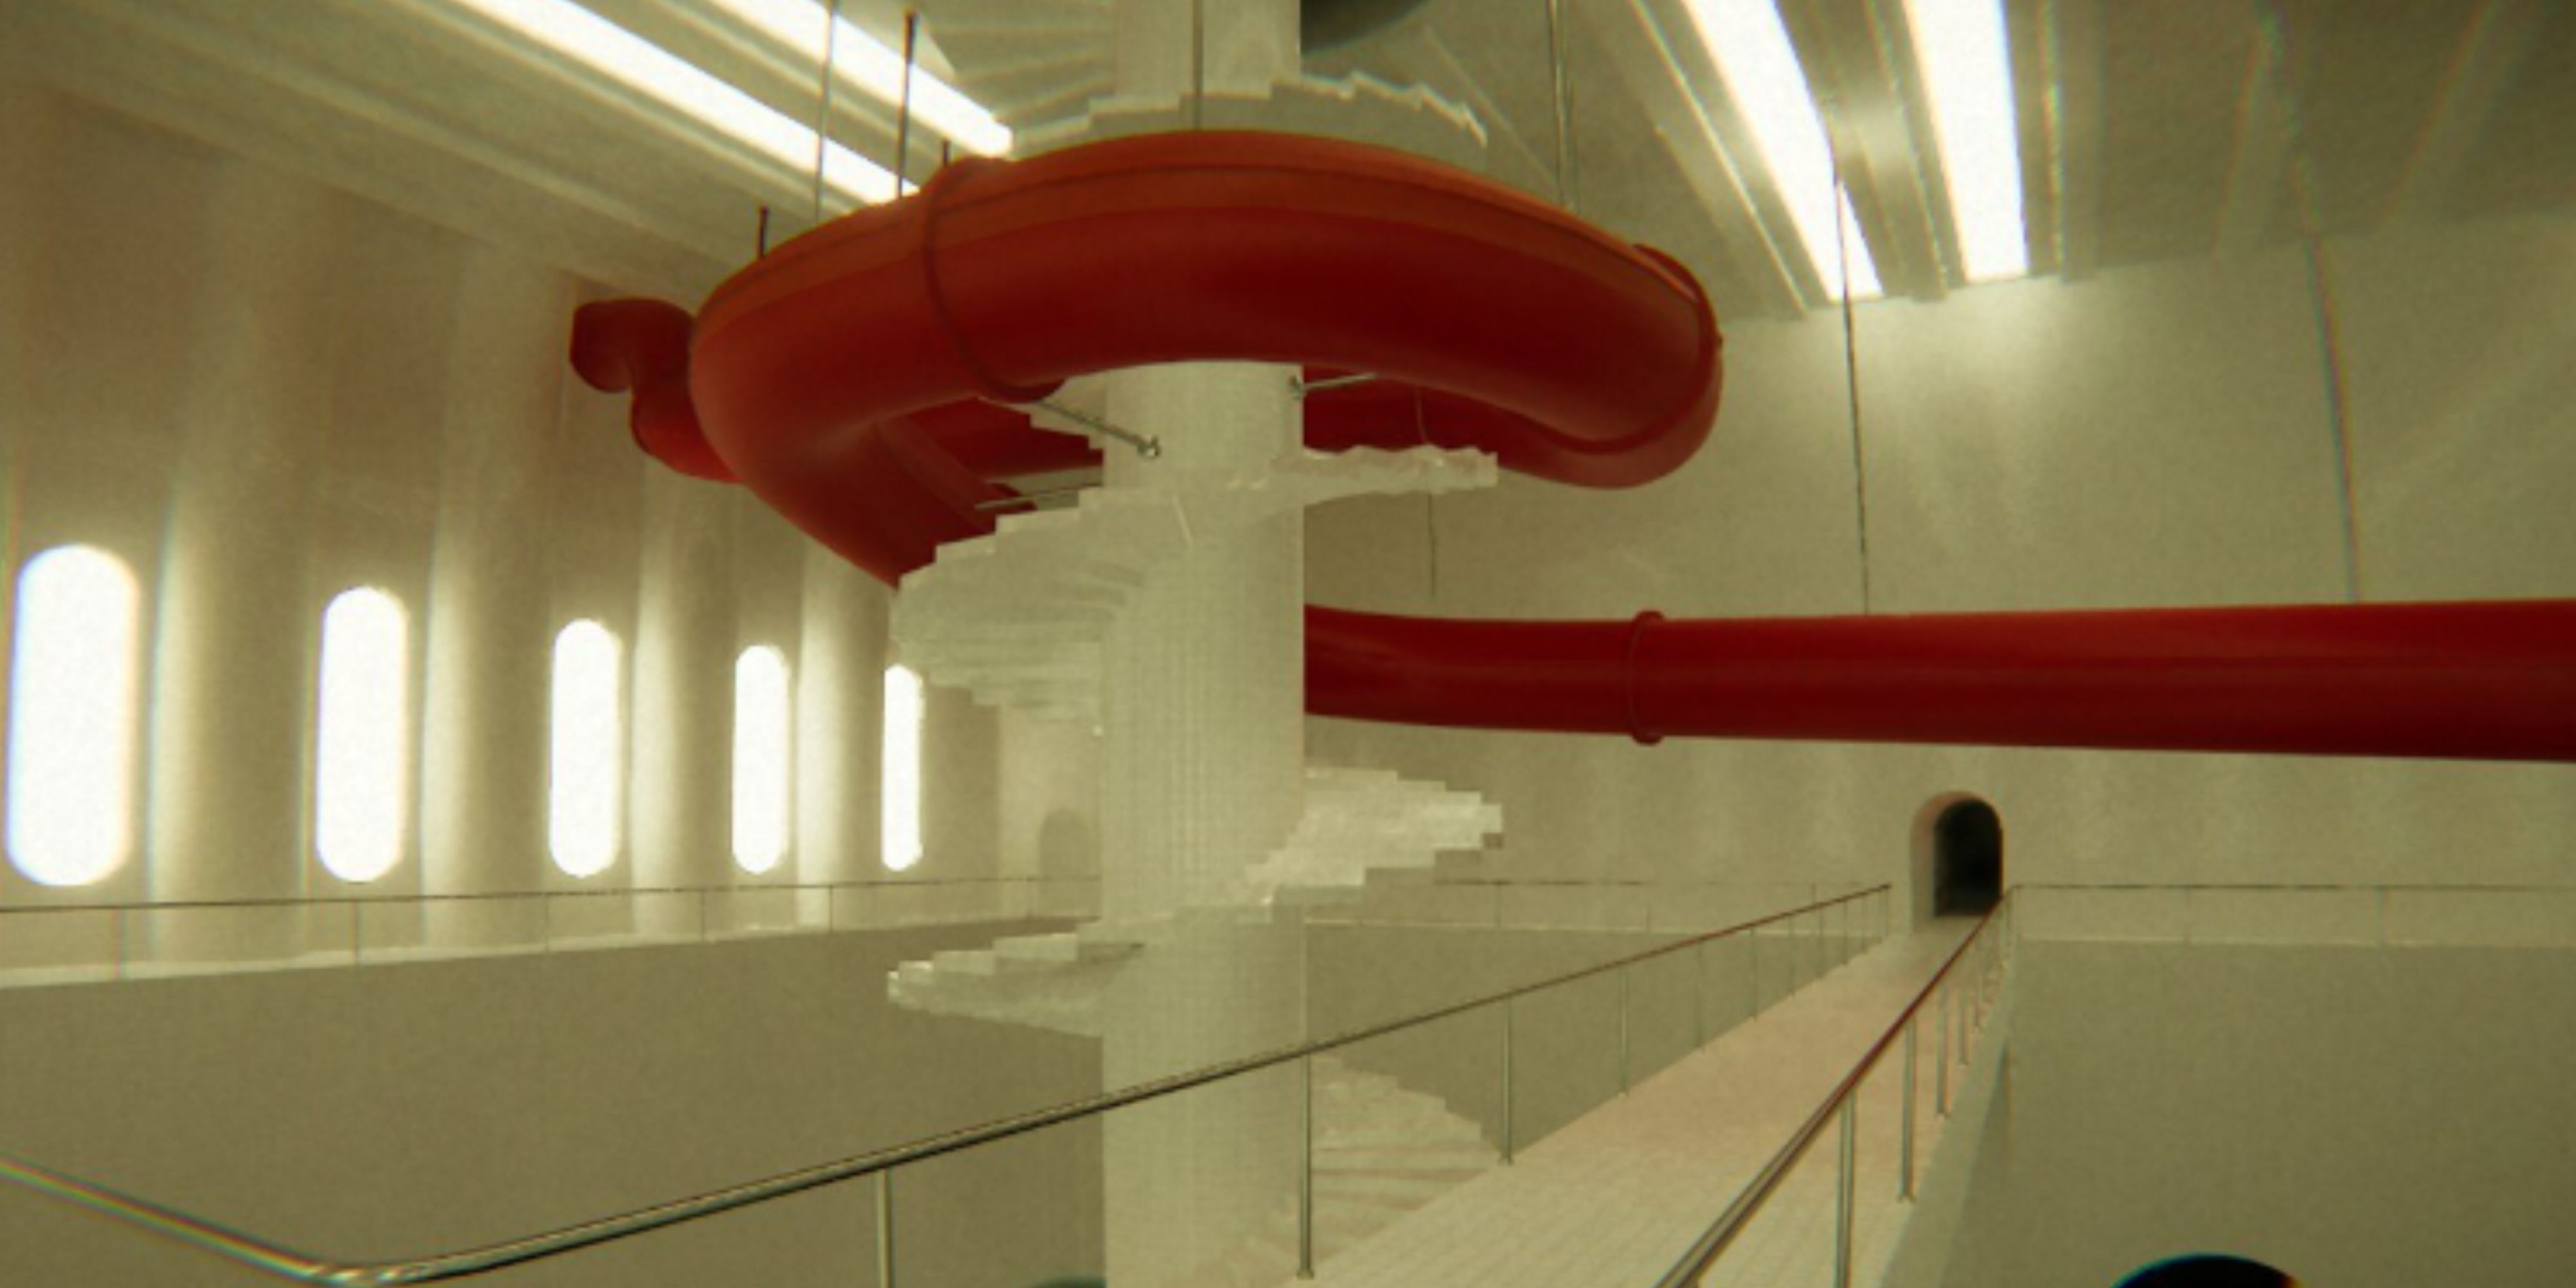 Pools screenshot showing slide wrapping around stairs